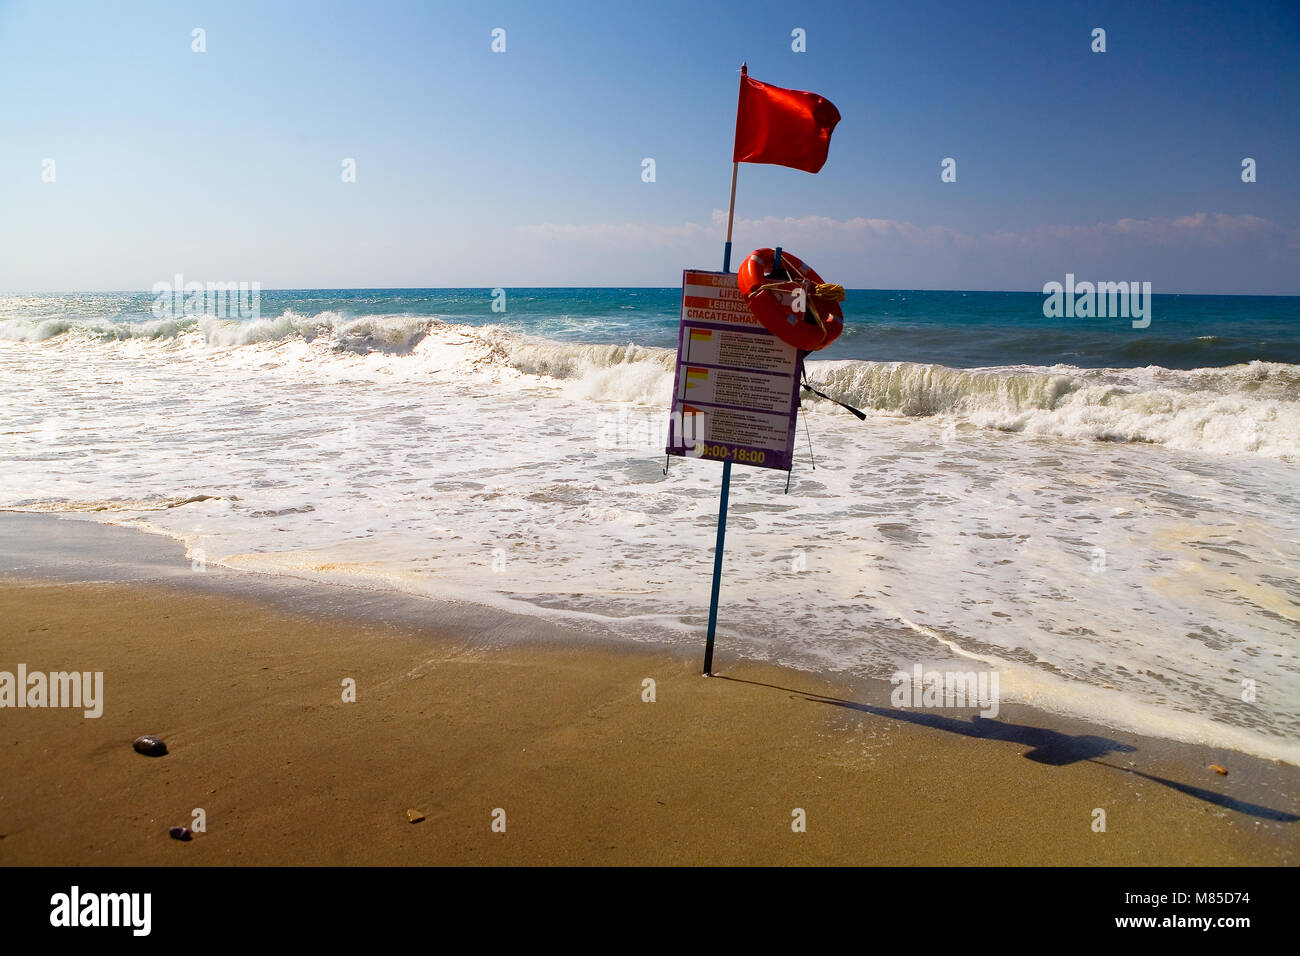 flag on the meaning that swimming is dangerous. Turkey - Alamy